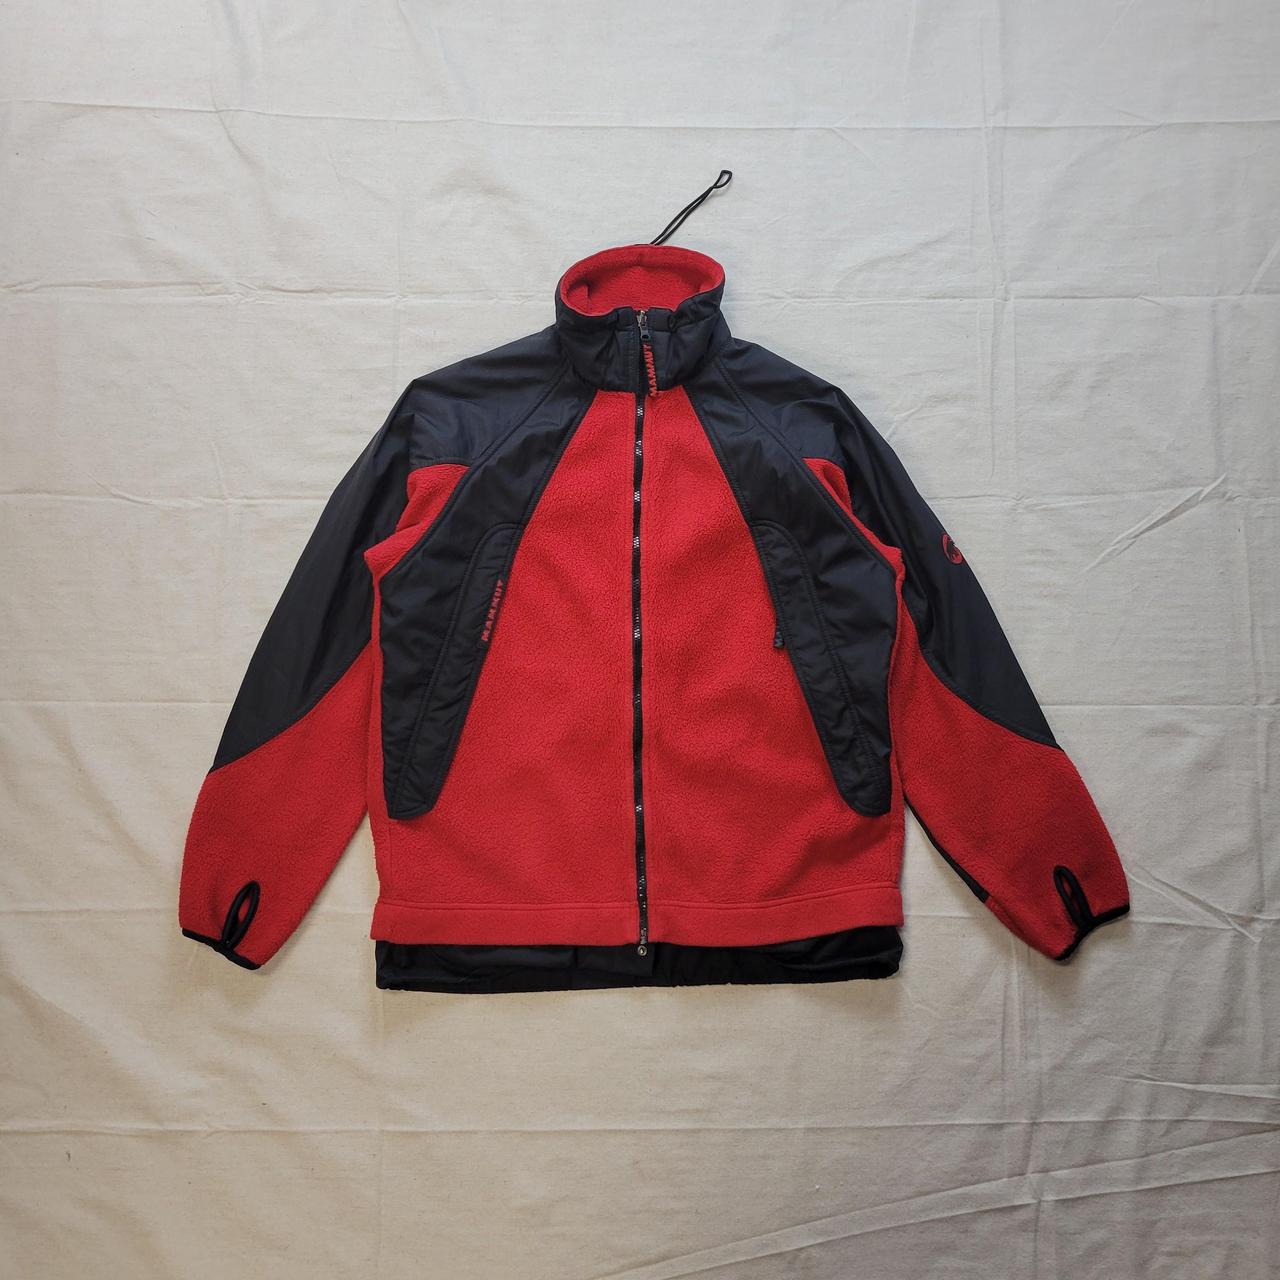 Mammut Men's Red and Black Jacket